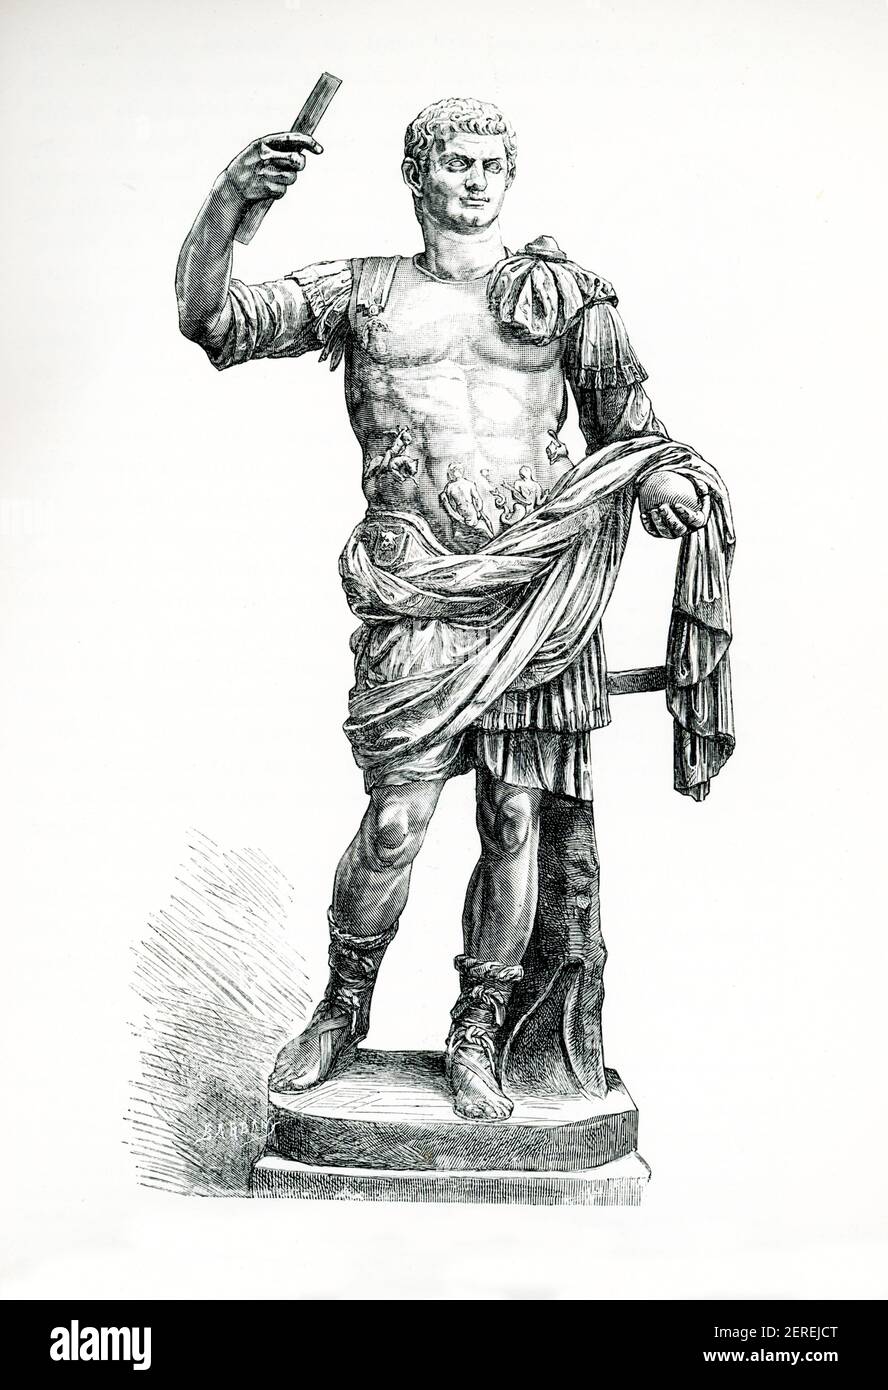 This 1880s illustrations shows the statue of Domitian in Vatican Braccio Novo No. 129. Domitian was Roman emperor from 81 to 96. He was the son of Vespasian and the younger brother of Titus, his two predecessors on the throne, and the last member of the Flavian dynasty. During his reign, the authoritarian nature of his rule put him at sharp odds with the Senate, whose powers he drastically curtailed. Stock Photo